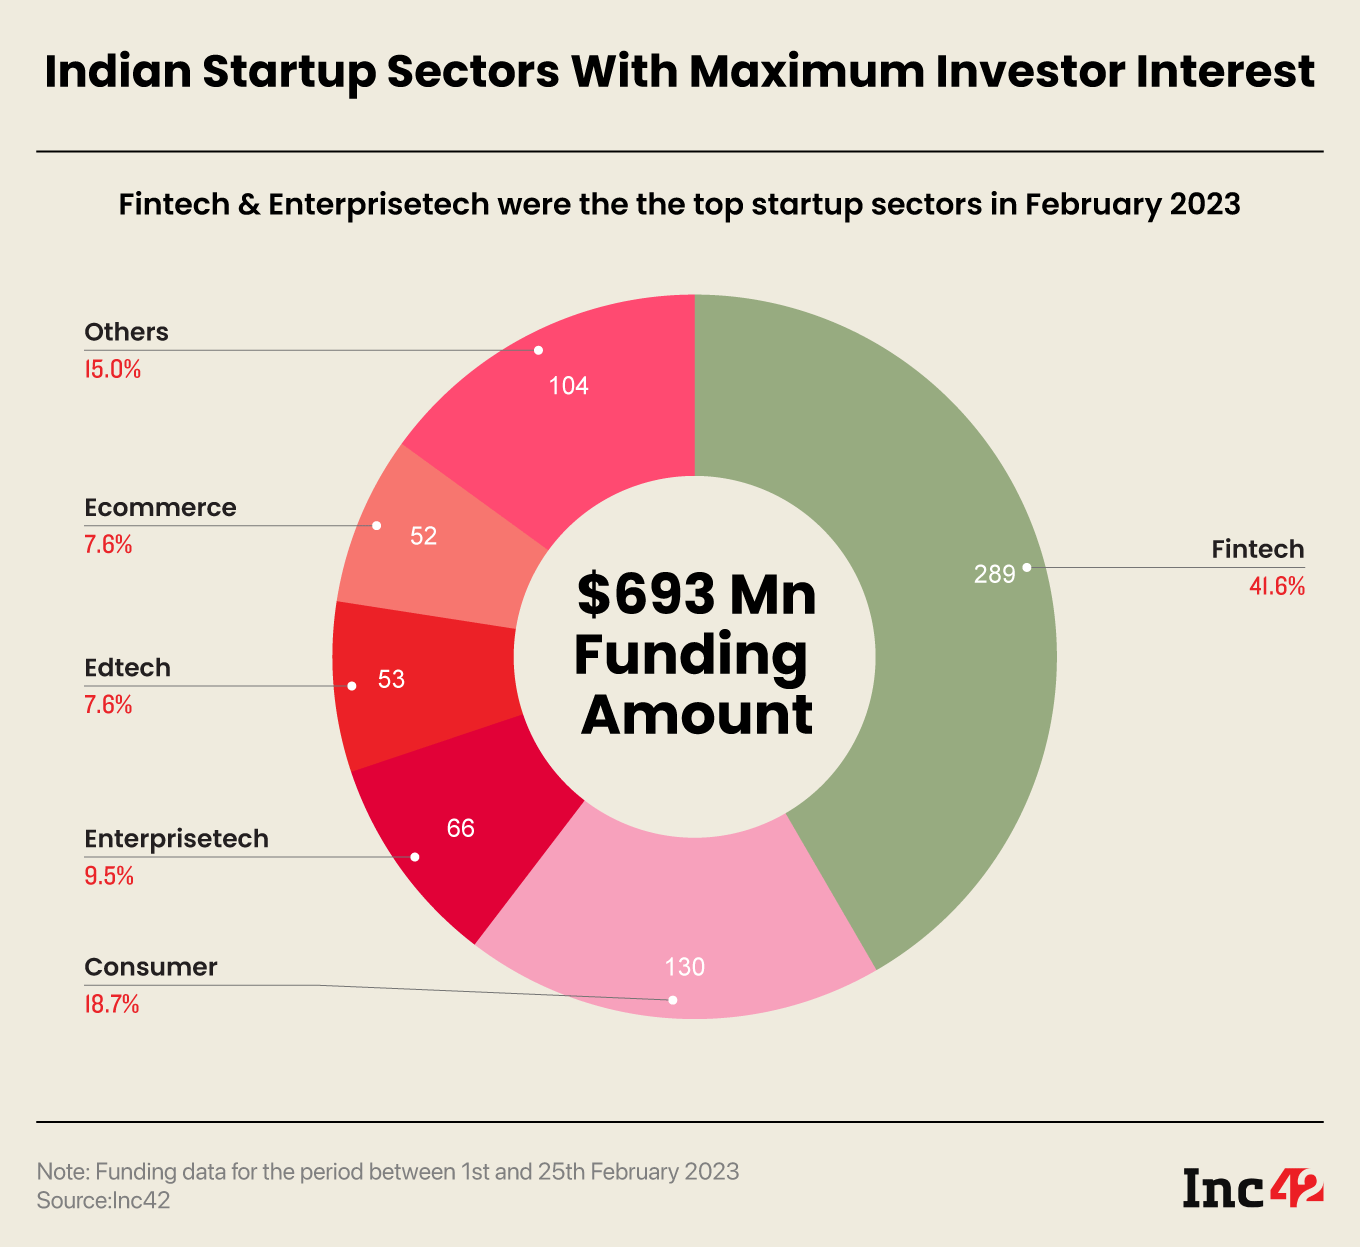 Sector-wise breakdown of Indian startup funding in February 2023